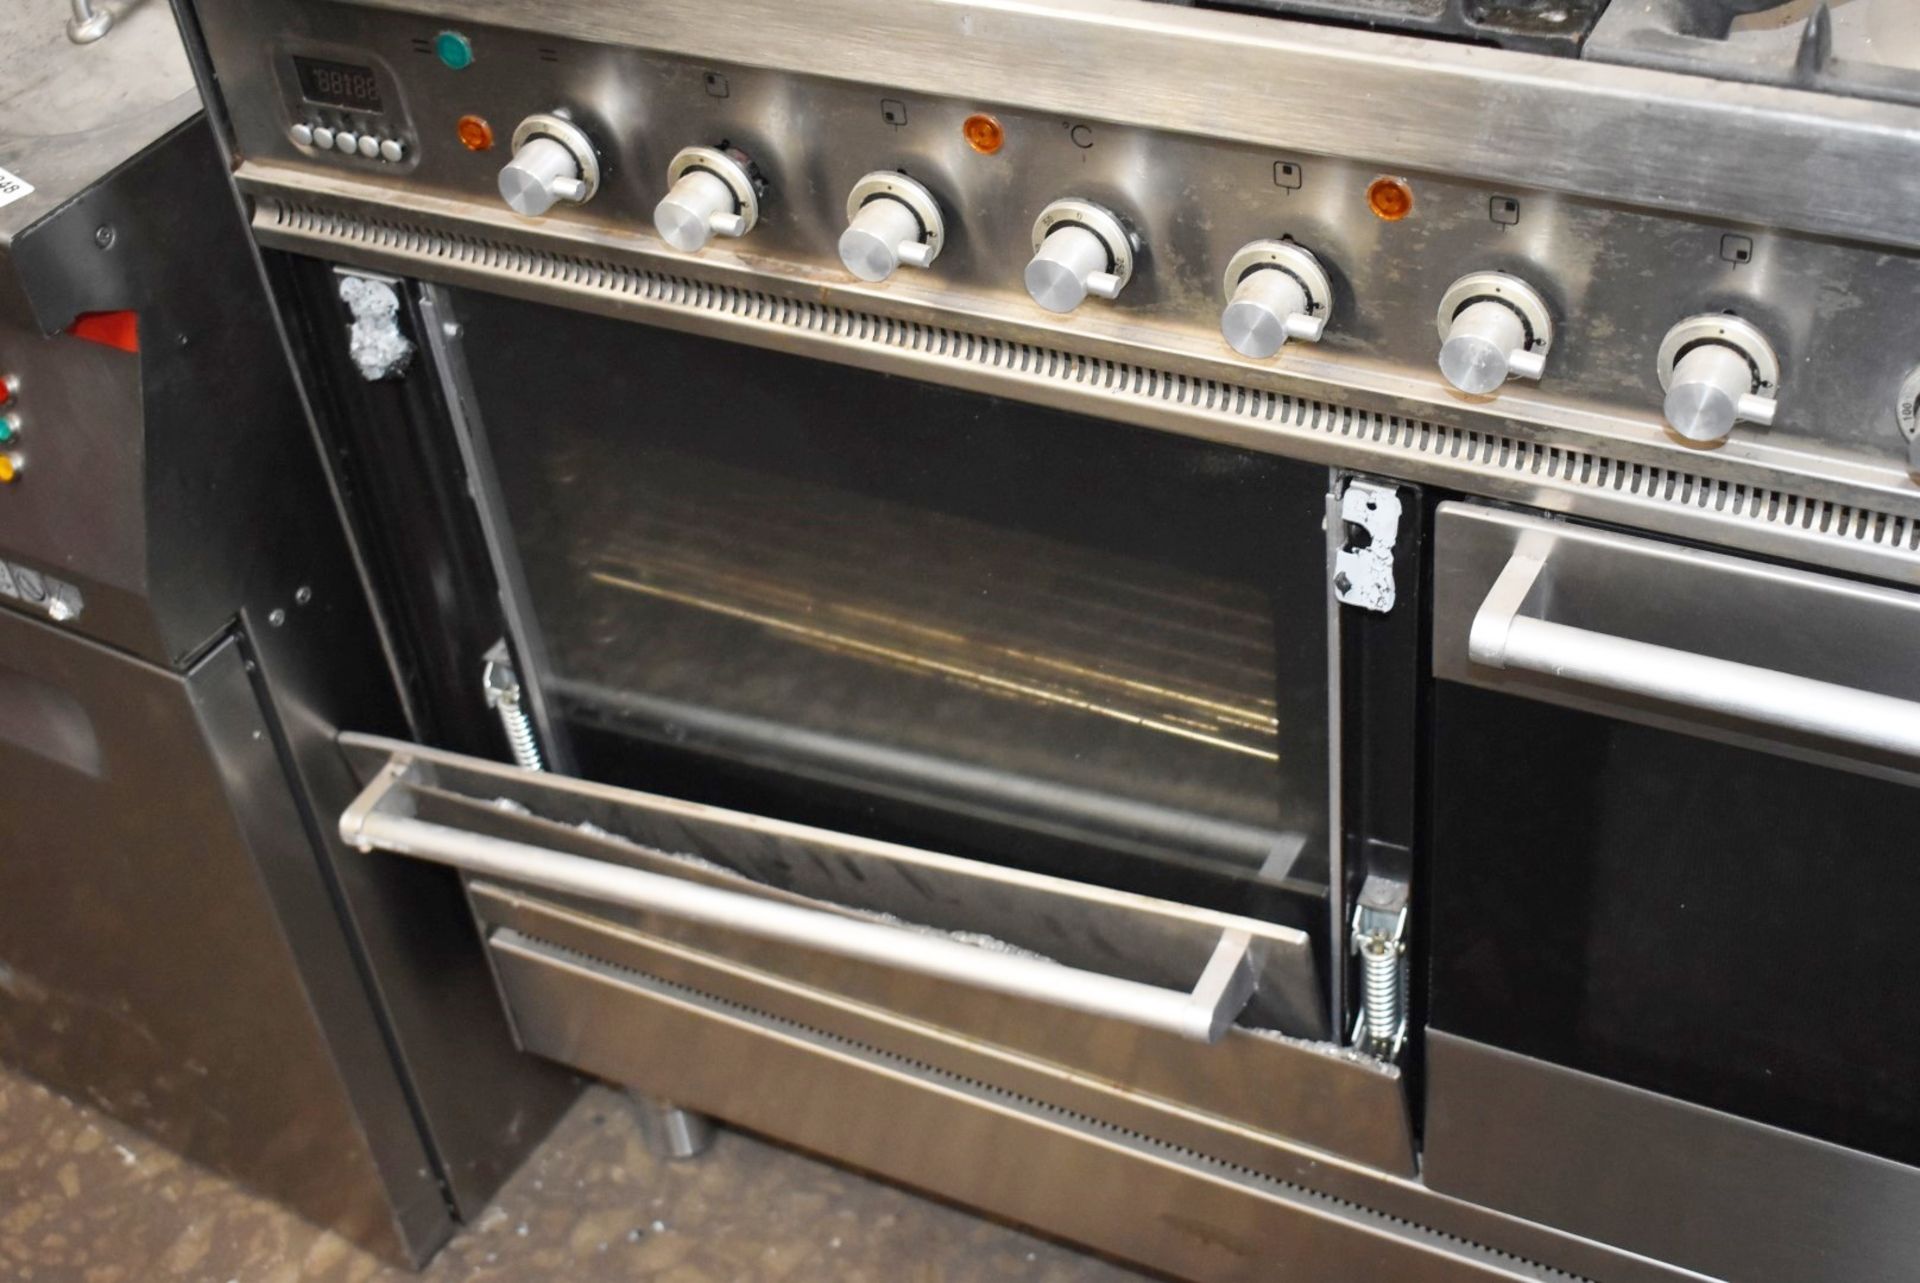 1 x Britainia 90cm Gas Range Cooker With Stainless Steel Finish and Accessories - Requires Attention - Image 7 of 10